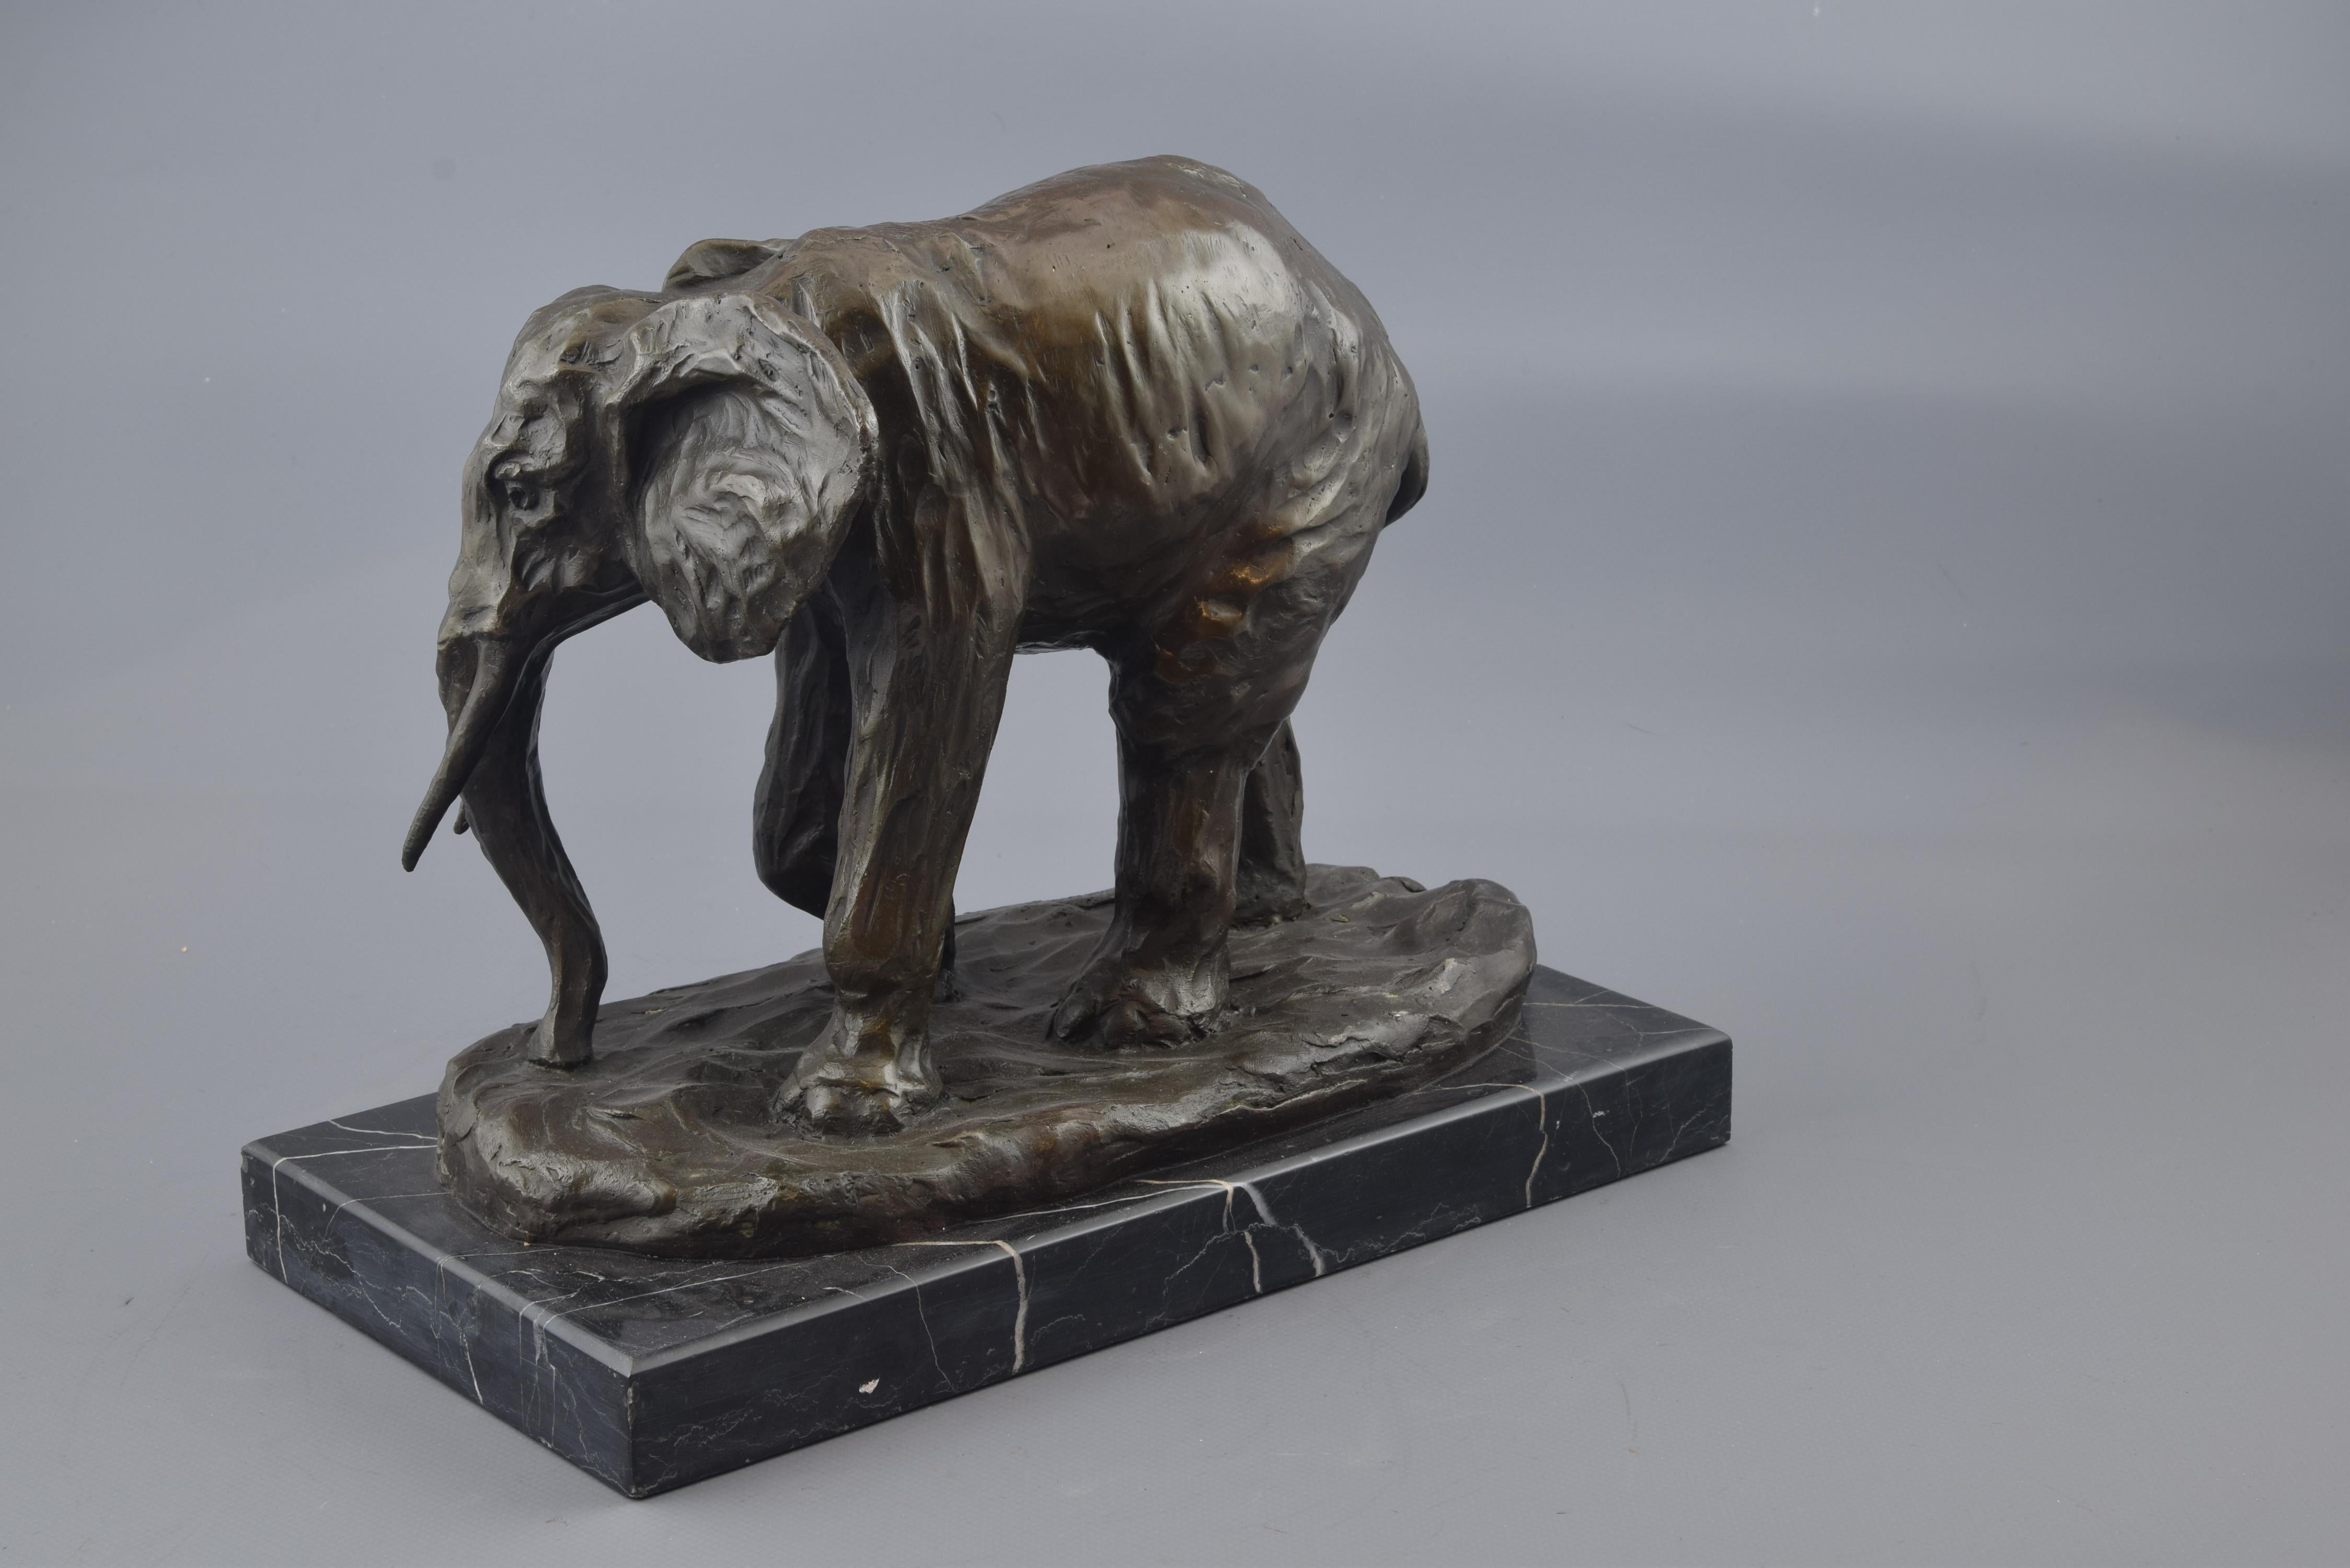 Lost wax casting. Base in marble. The elephant is placed walking on a base treated so that it resembles land. The inspiration for the present sculpture comes from works by the artist who signed as 